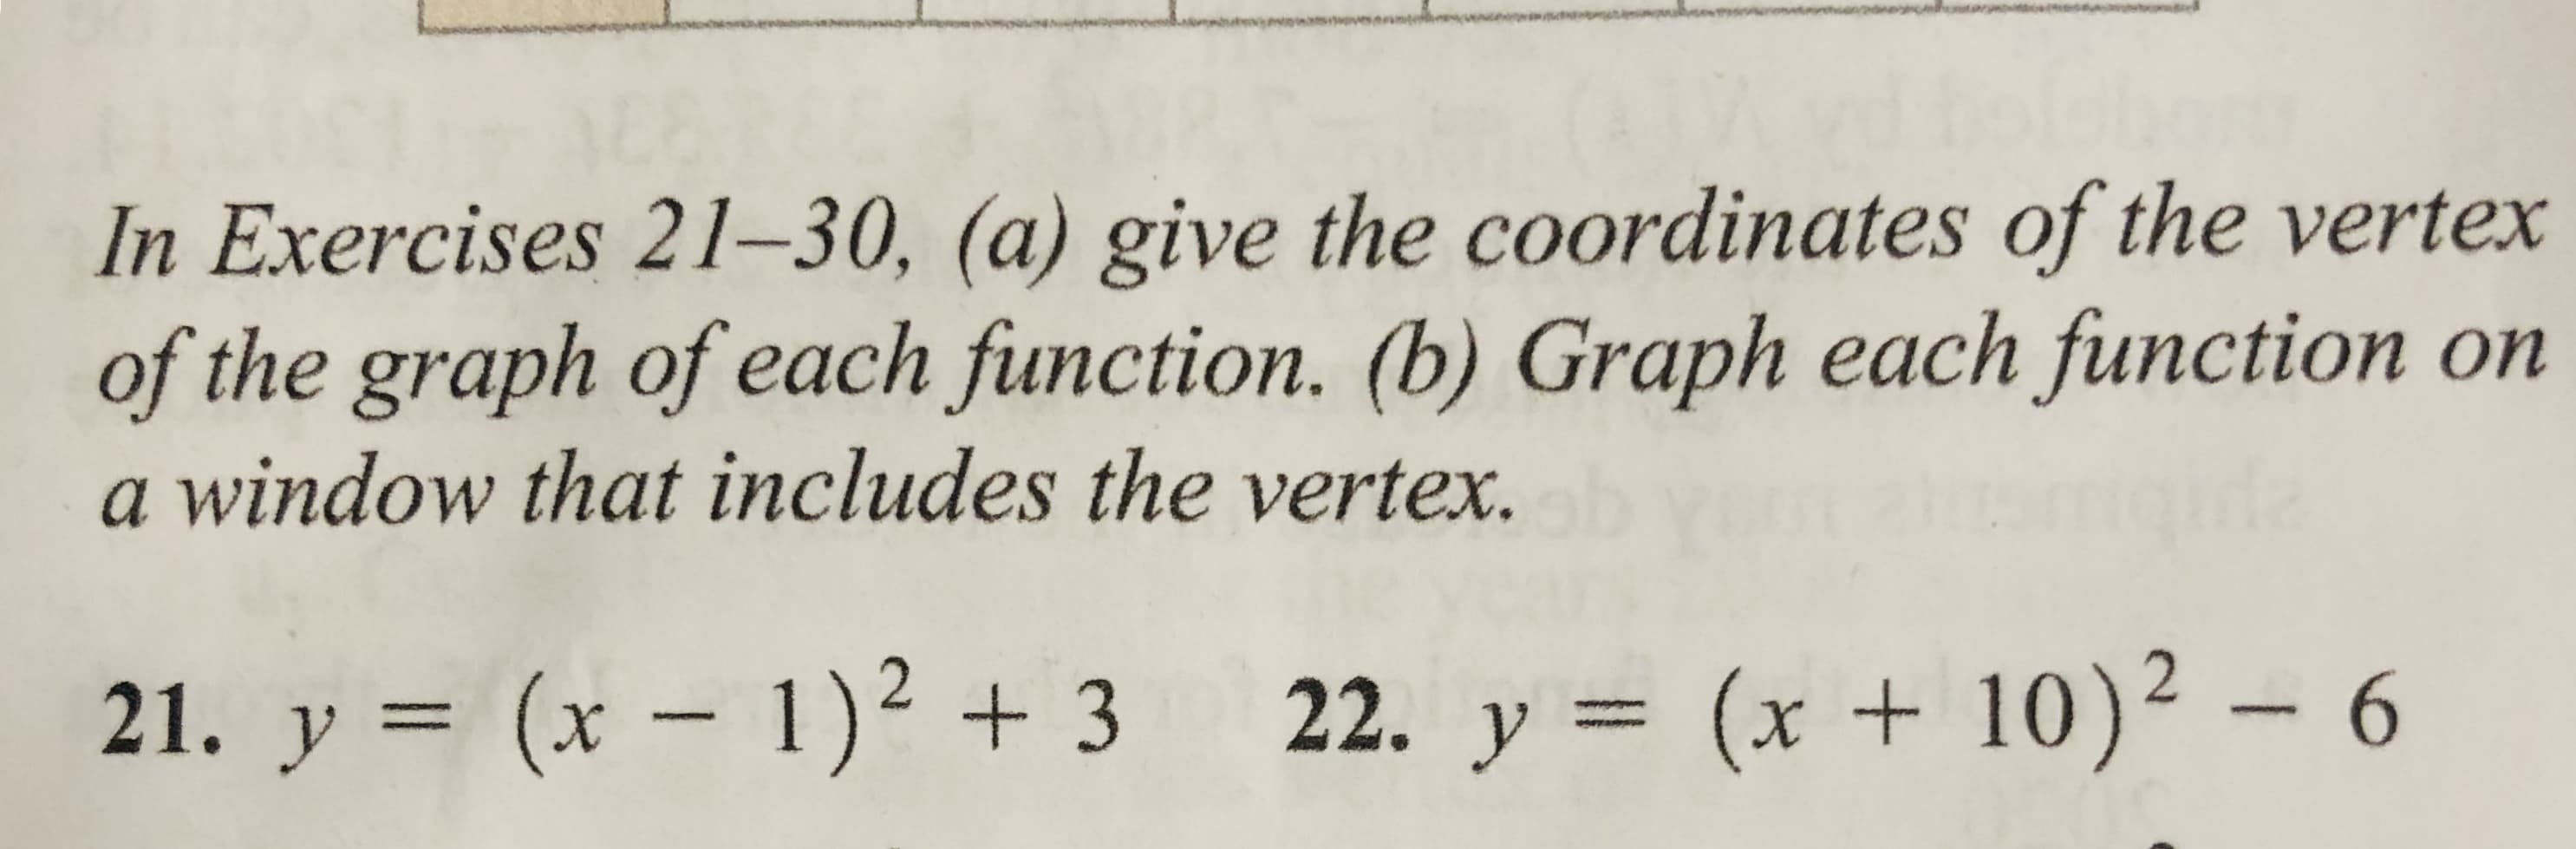 In Exercises 21–30, (a) give the coordinates of the vertex
of the graph of each function. (b) Graph each function on
a window that includes the vertex.
gida
(x +10)²
21. y = (x – 1)² + 3 22. y = (x + 10)² – 6
